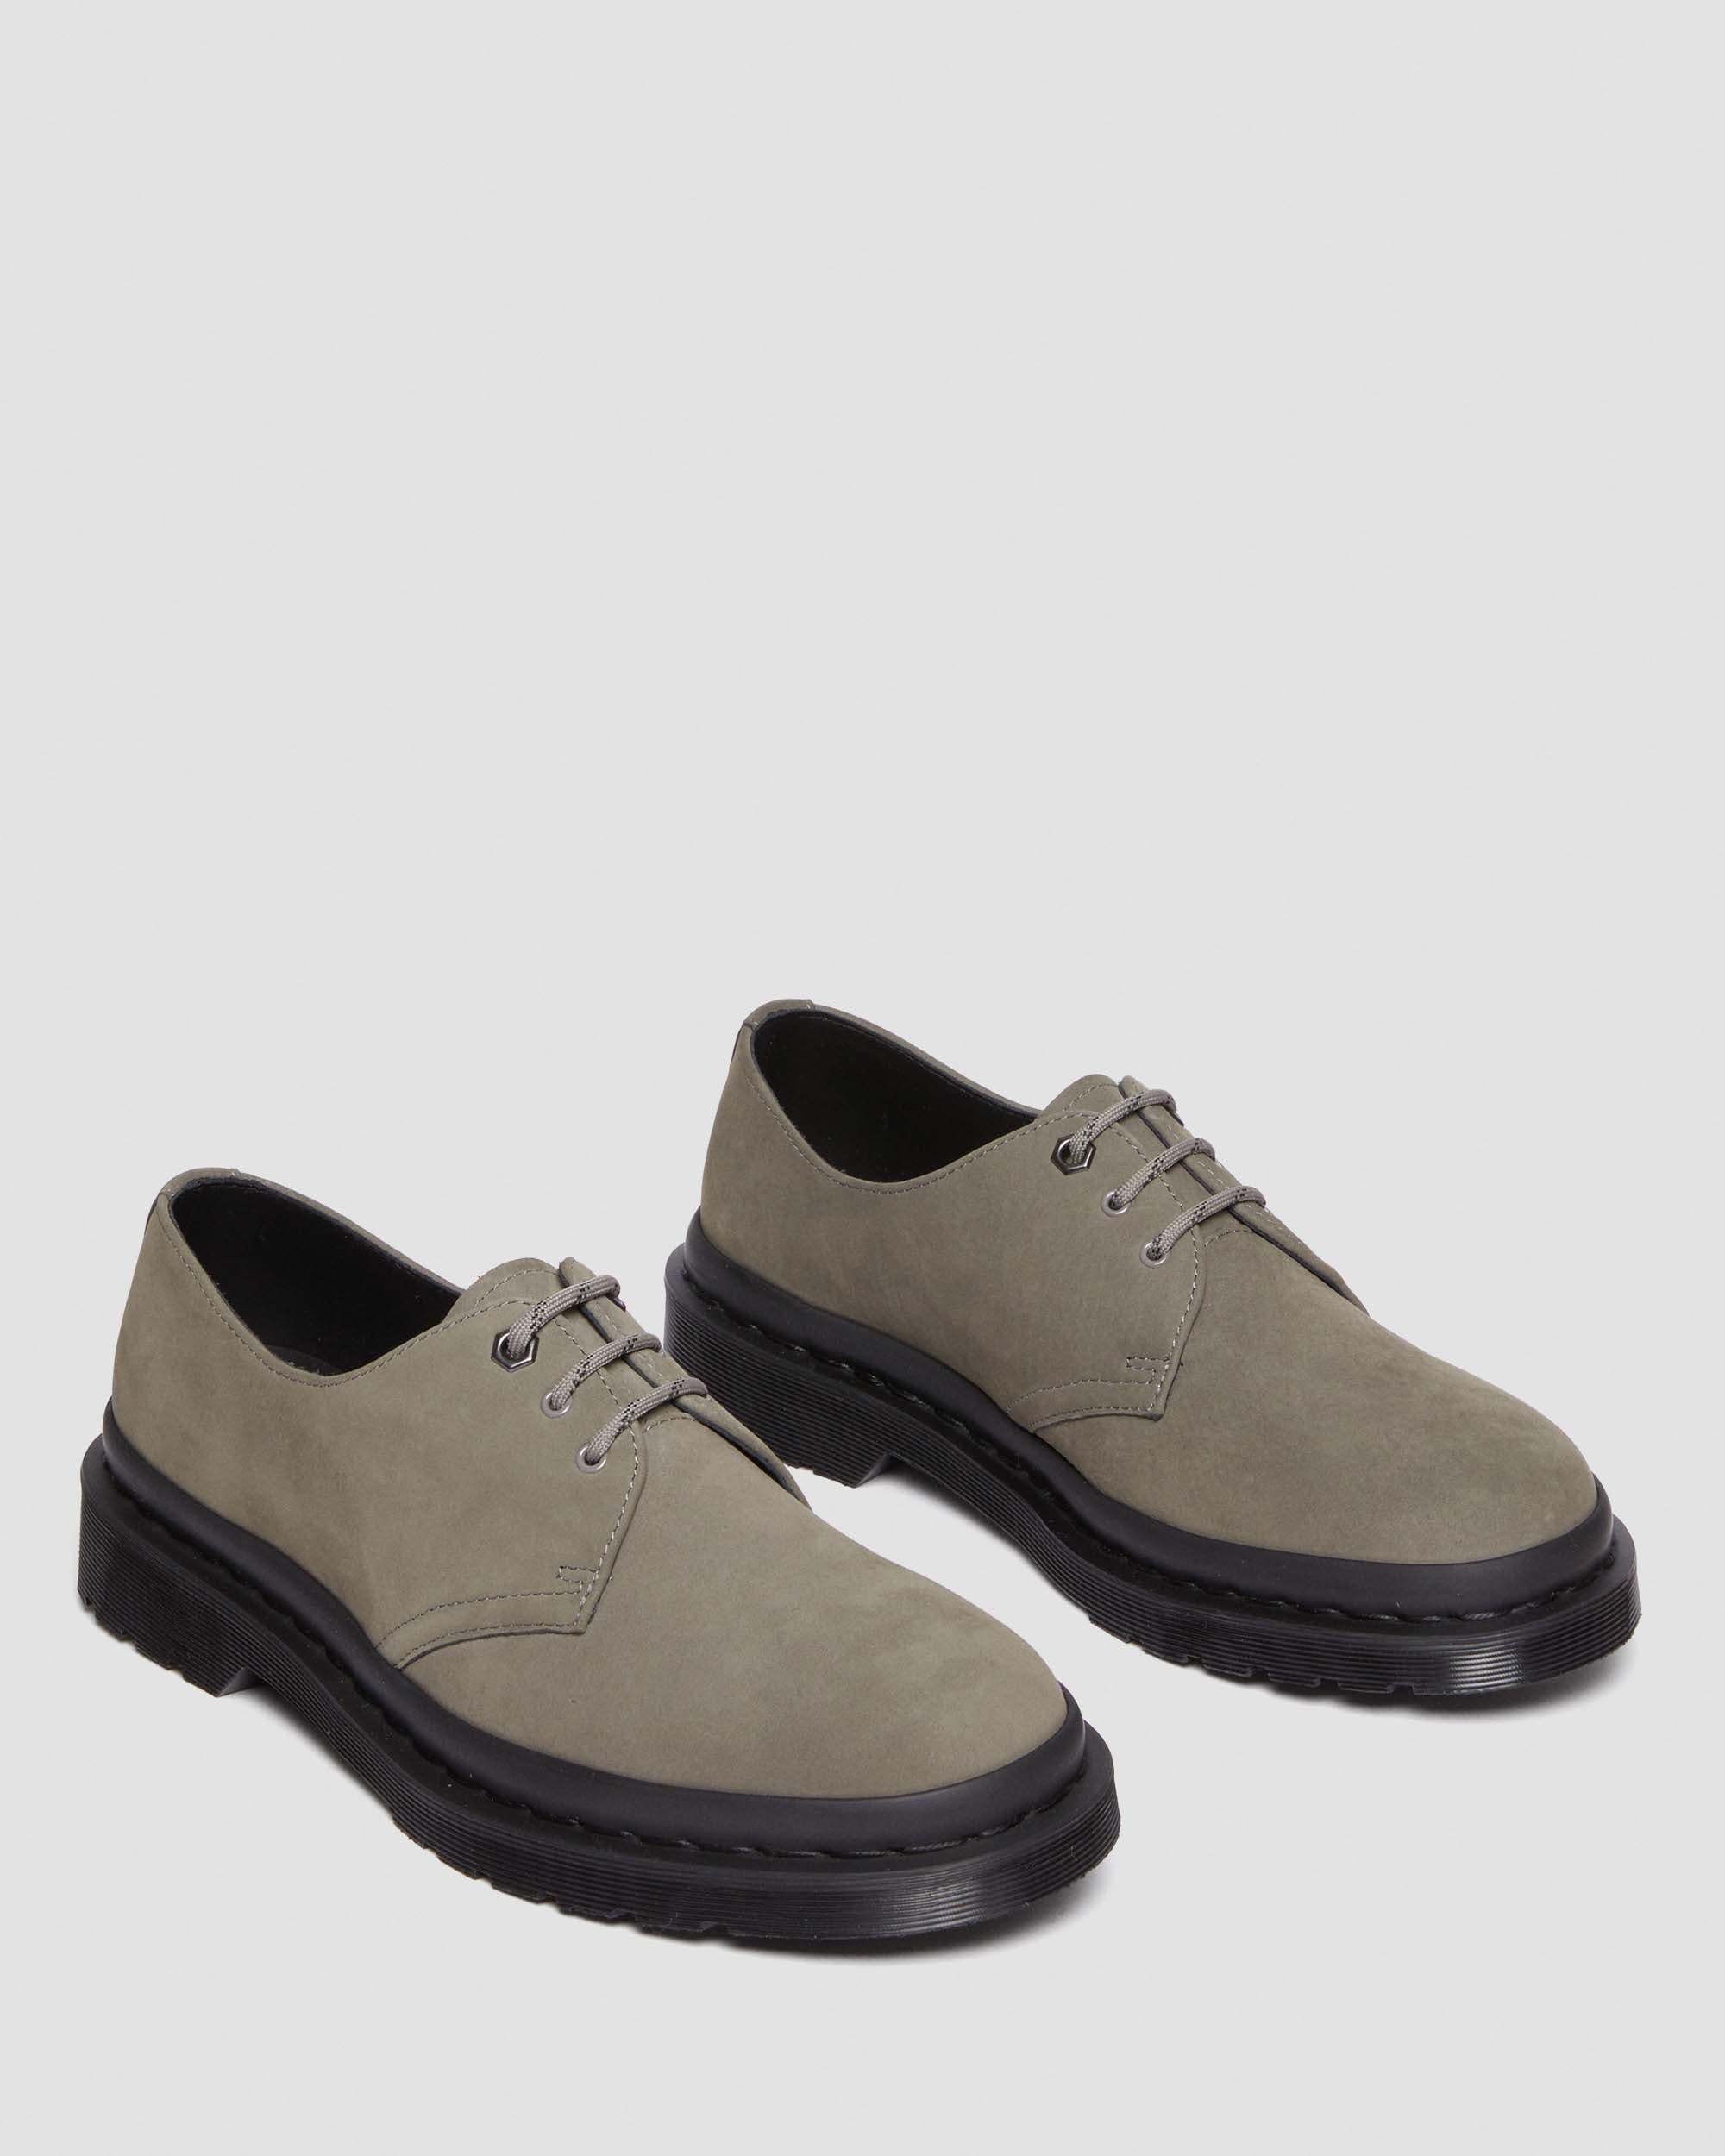 1461 Milled Nubuck Water-Resistant Leather Shoes